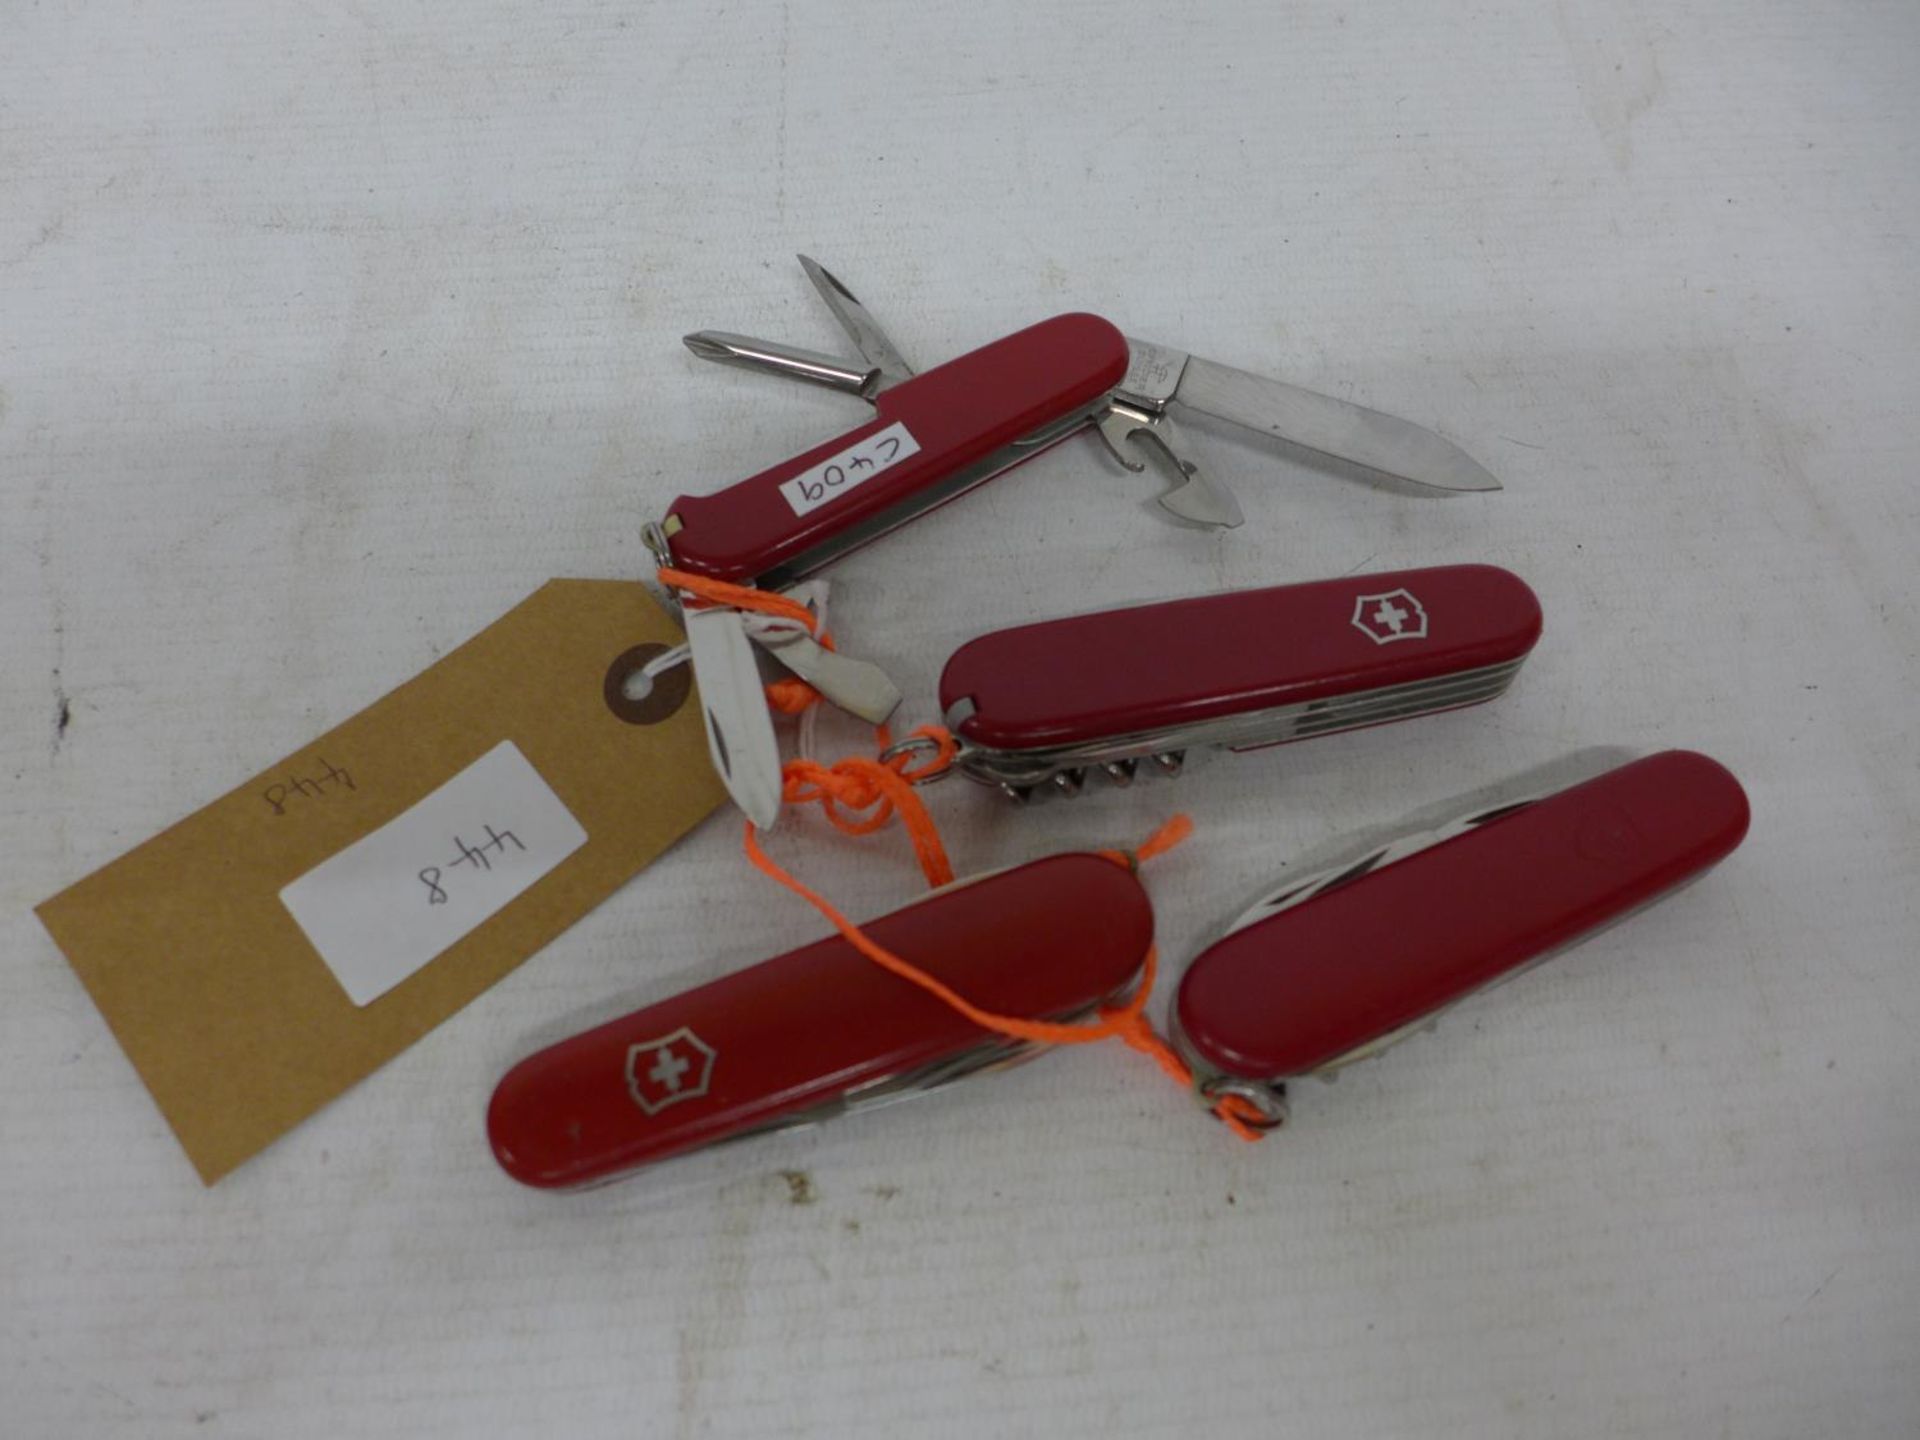 FOUR VICTORINOX SWISS ARMY KNIVES